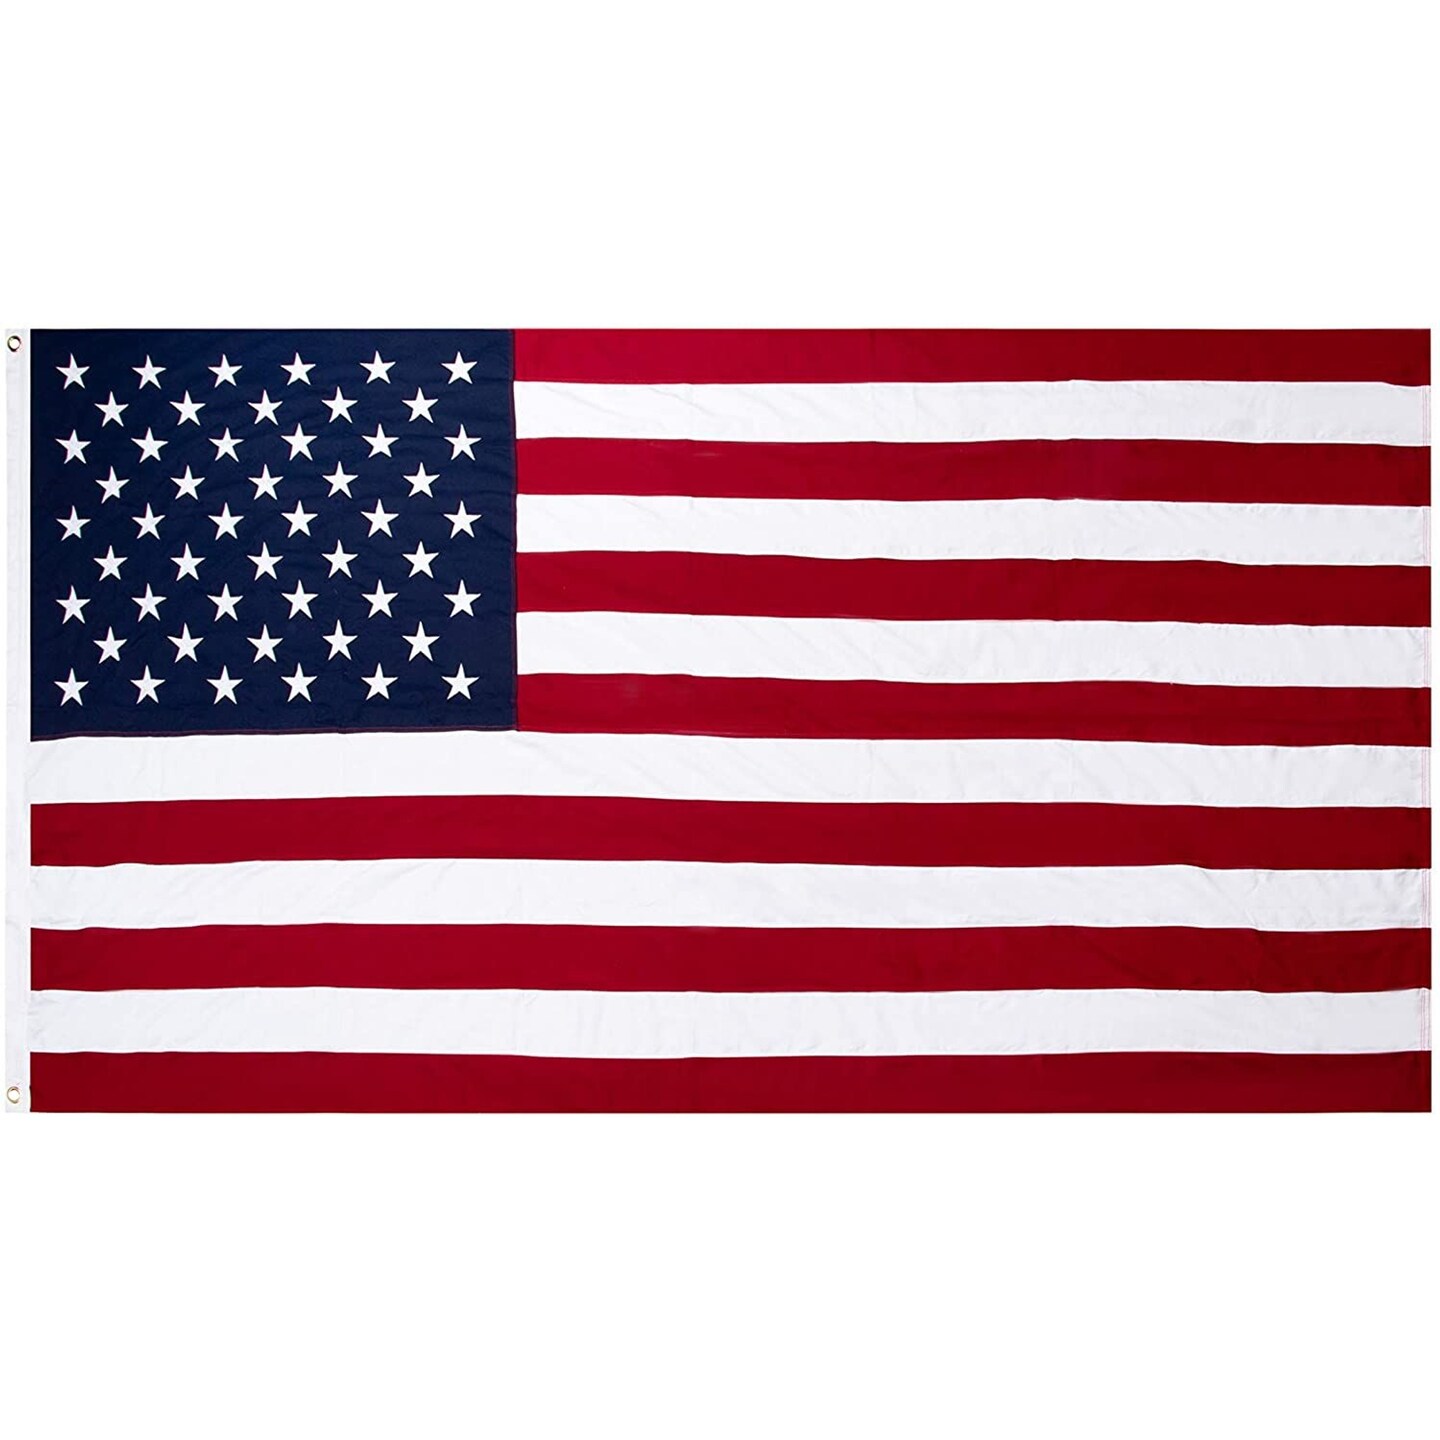 5x9.5 American Casket Flag with Embroidered Stars for United States Veteran Burial, Memorial Service, Patriotic Decor